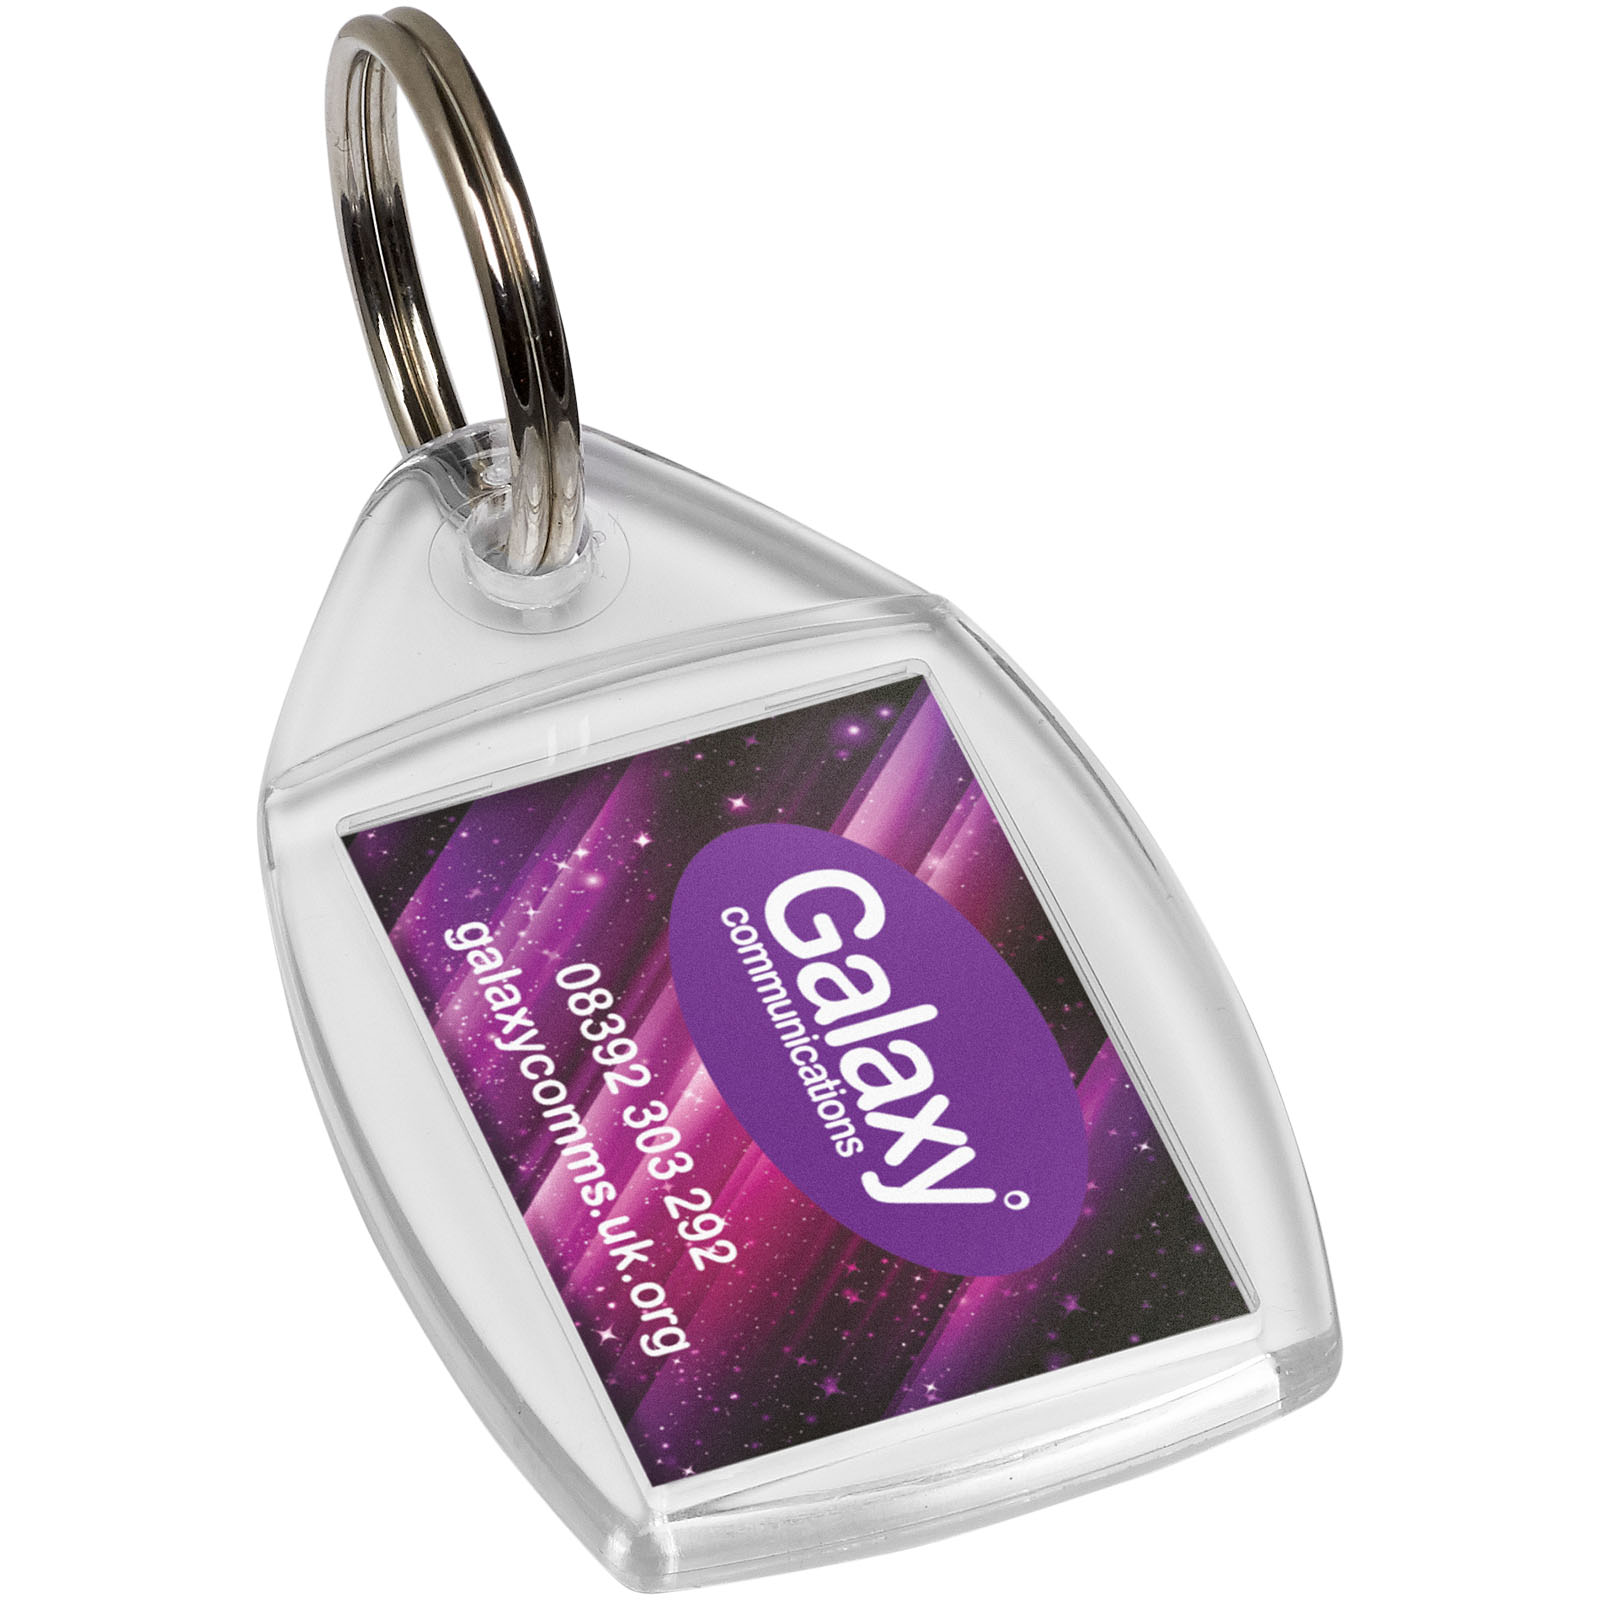 A clear P5 keychain featuring a metal split keyring from Burnham Thorpe. - East Bergholt